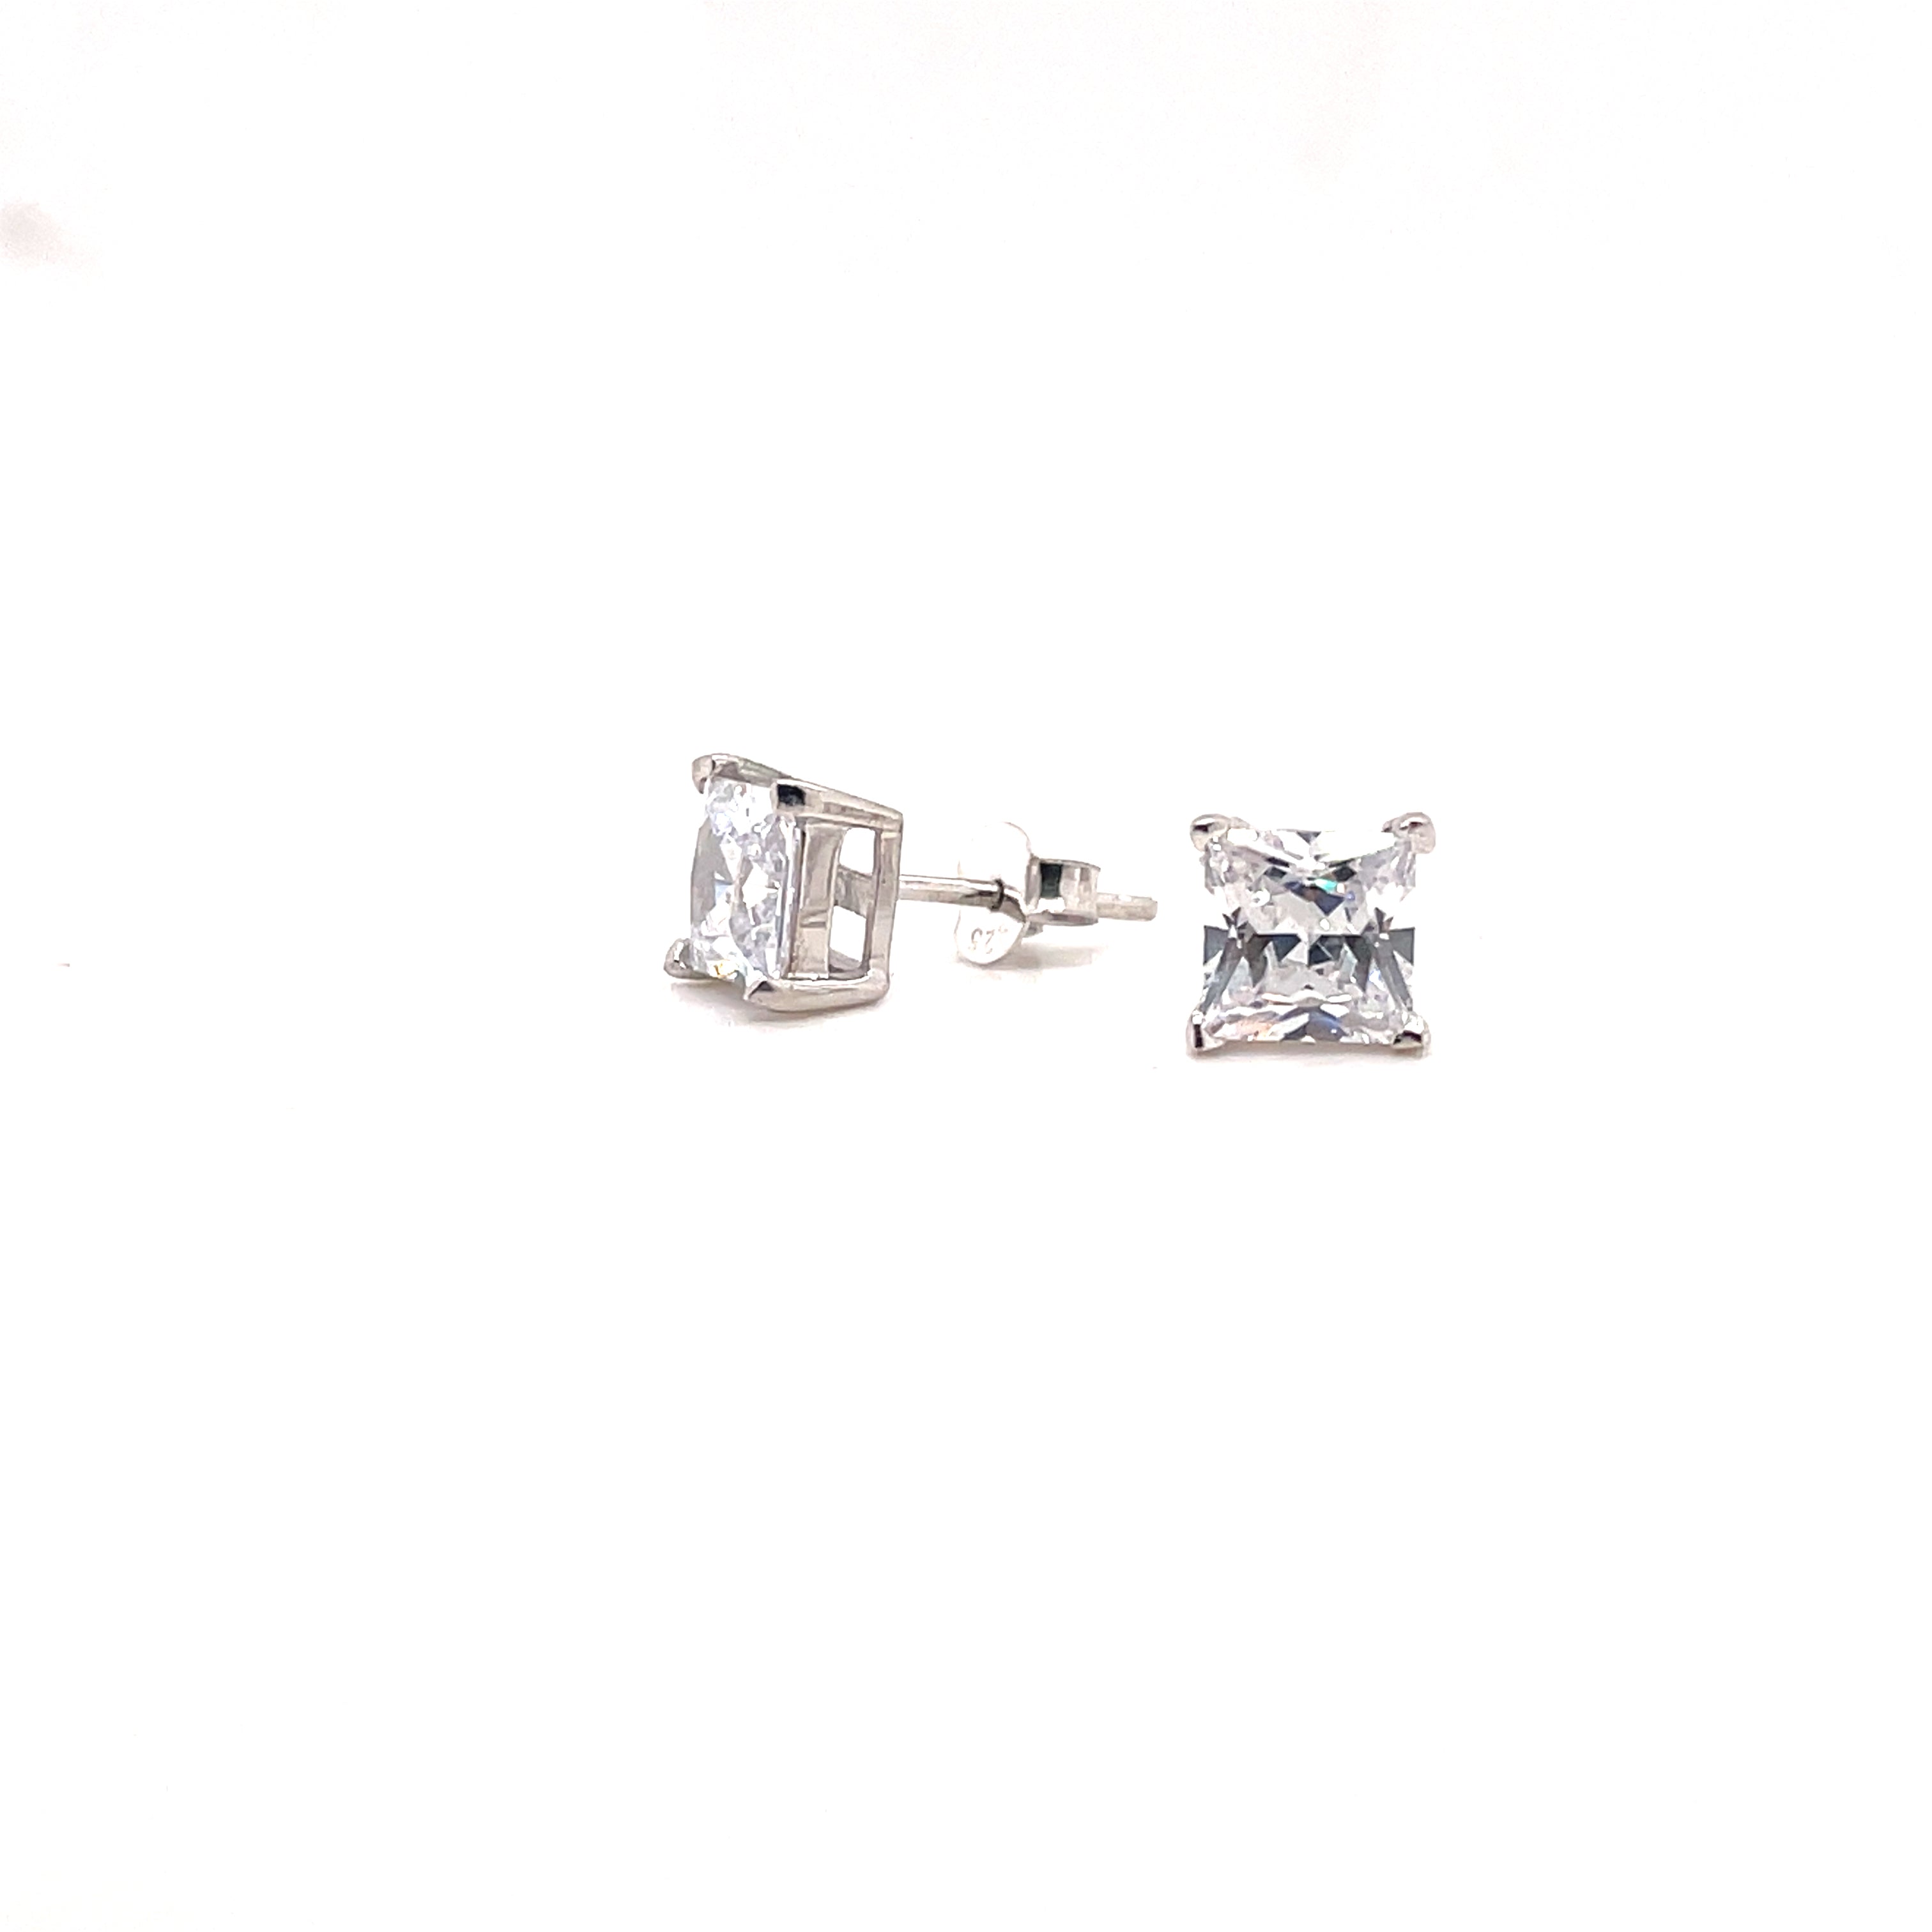 Sterling Silver Square CZ Stud Earrings - All Sizes - Hallmark Jewellers Formby & The Jewellers Bench Widnes